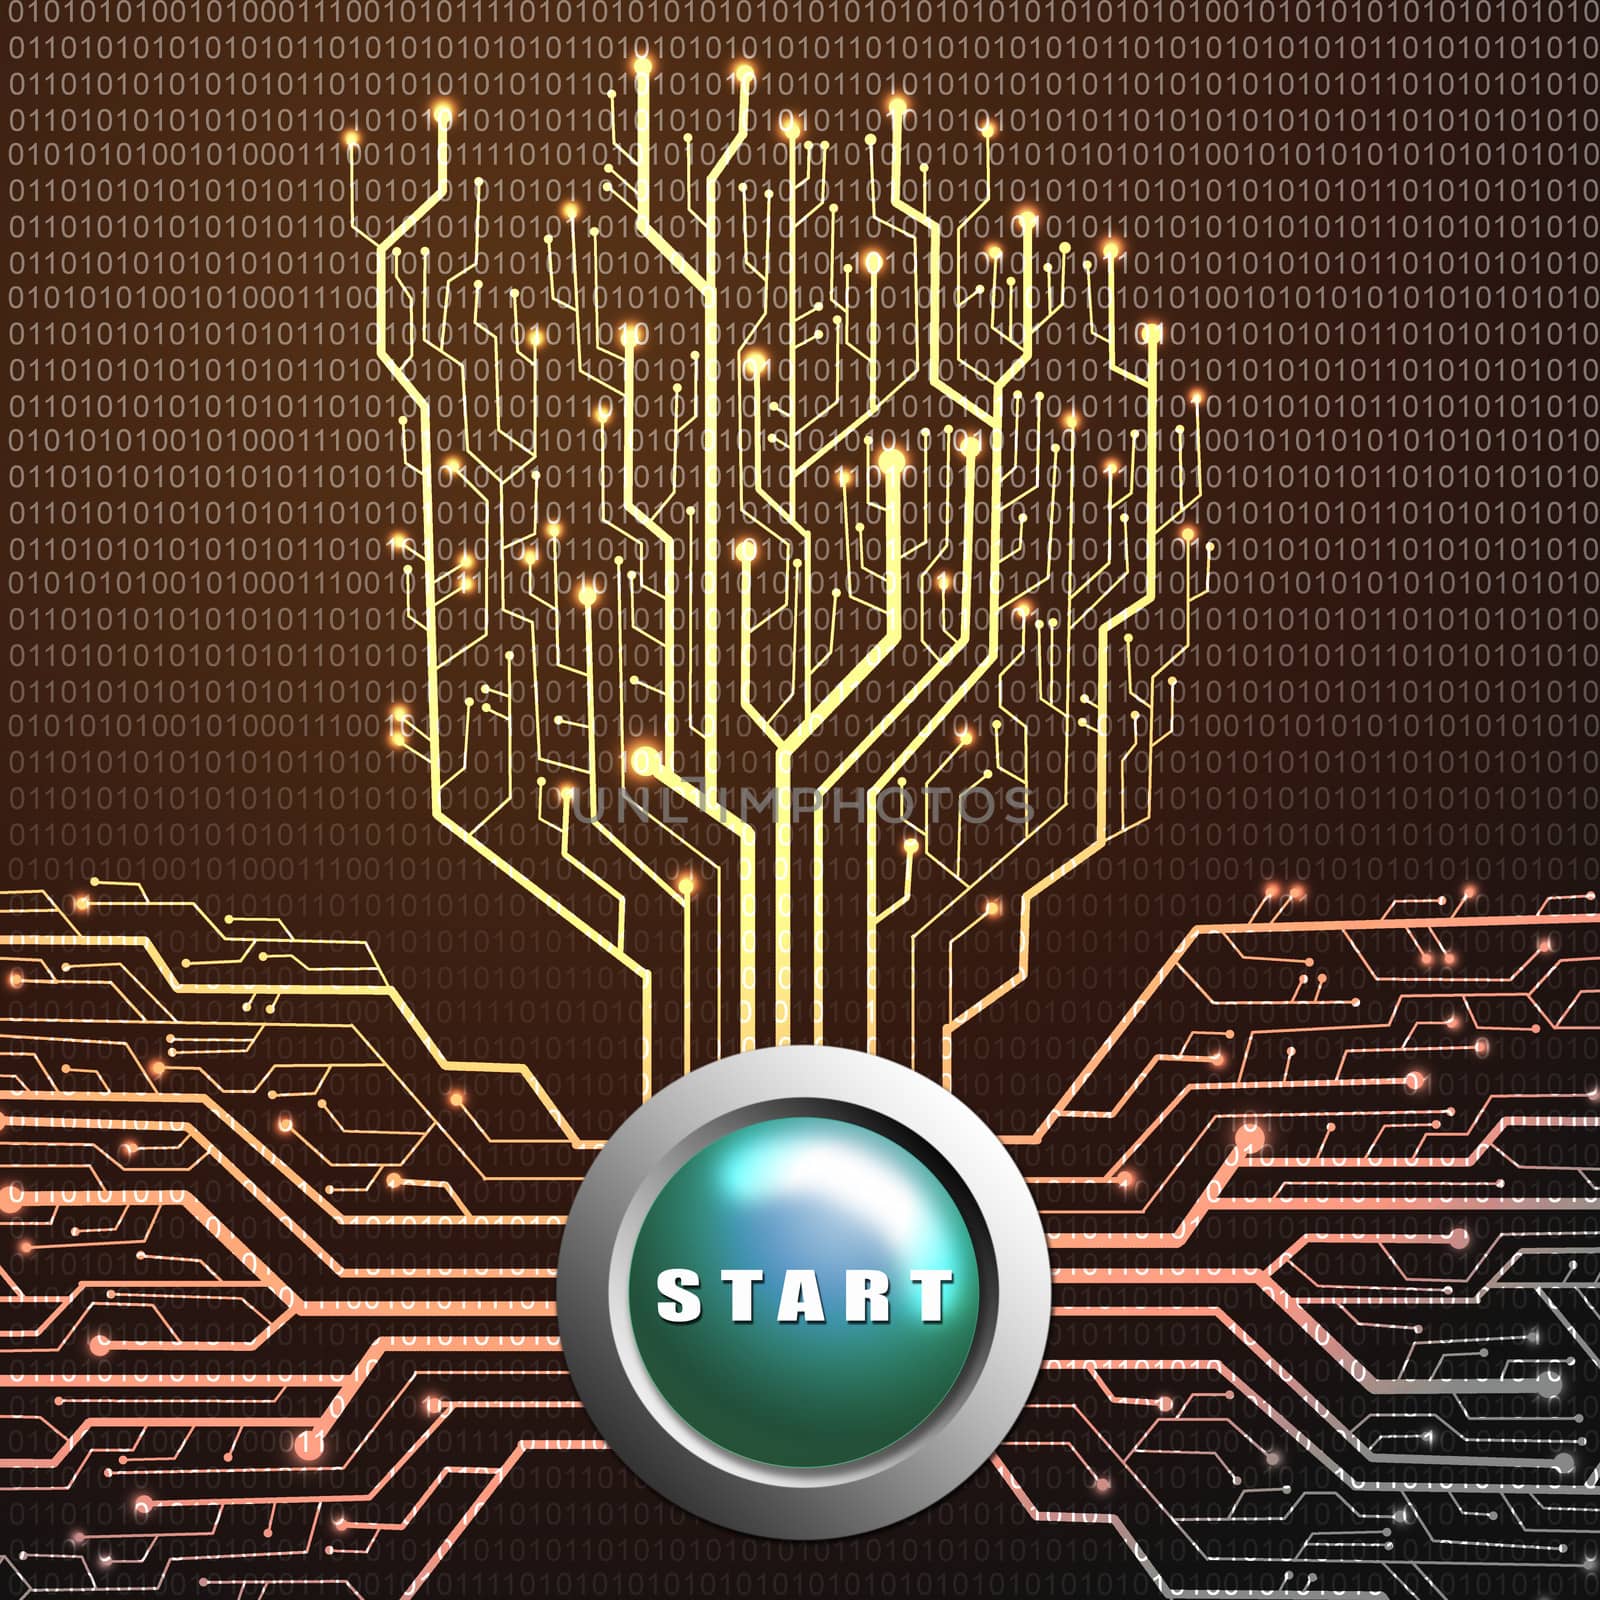 Start button on circuit board in Tree shape, Technology background by pixbox77